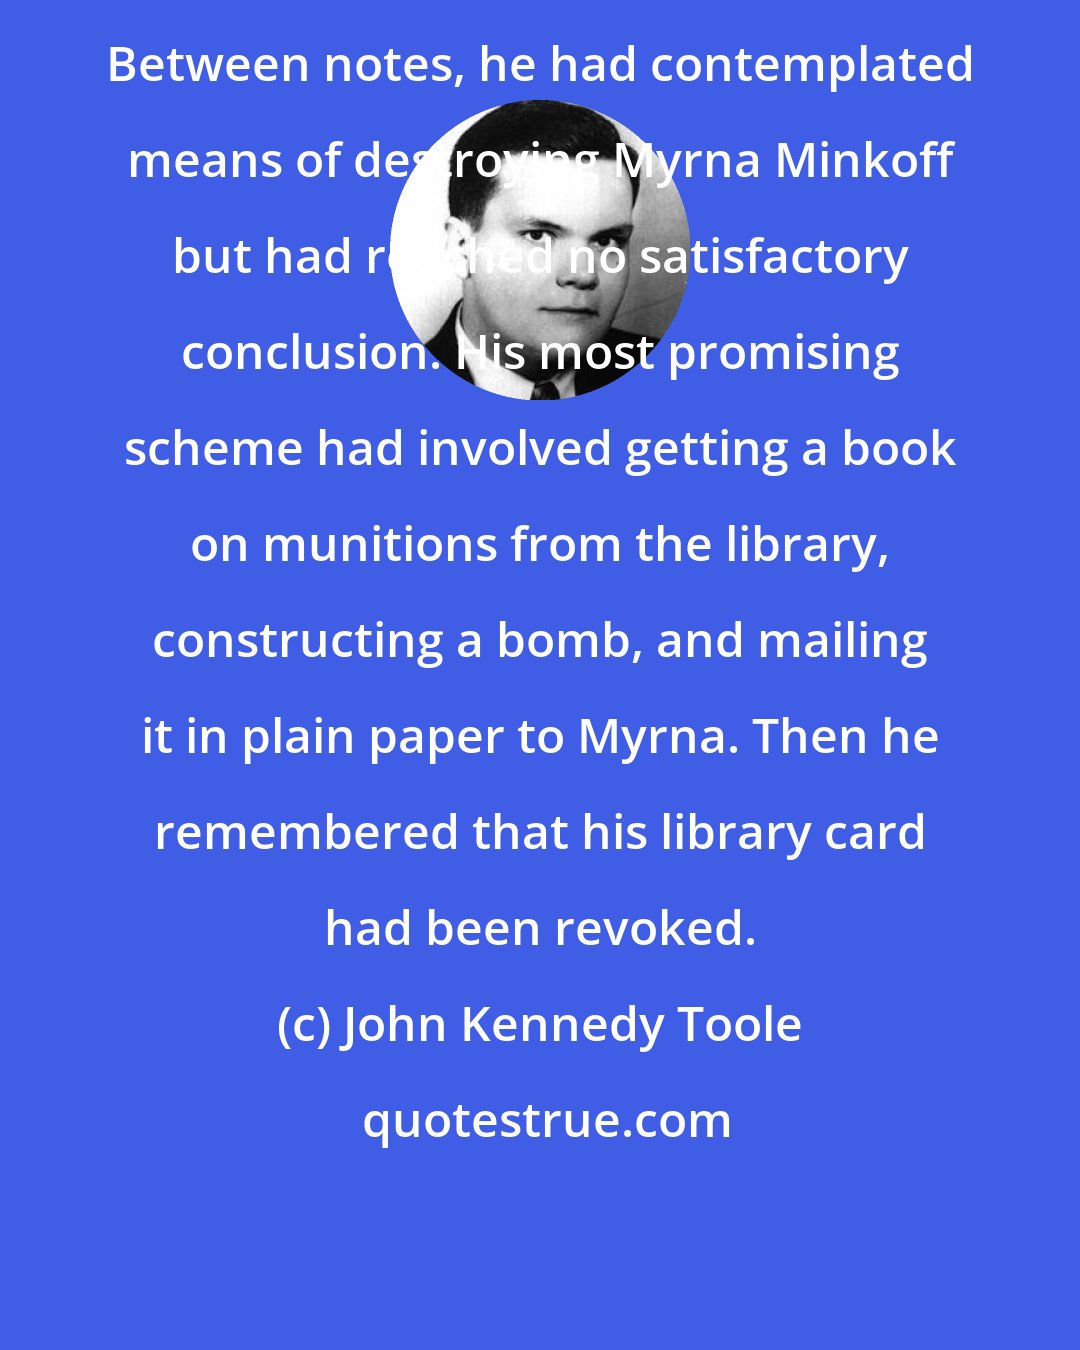 John Kennedy Toole: Between notes, he had contemplated means of destroying Myrna Minkoff but had reached no satisfactory conclusion. His most promising scheme had involved getting a book on munitions from the library, constructing a bomb, and mailing it in plain paper to Myrna. Then he remembered that his library card had been revoked.